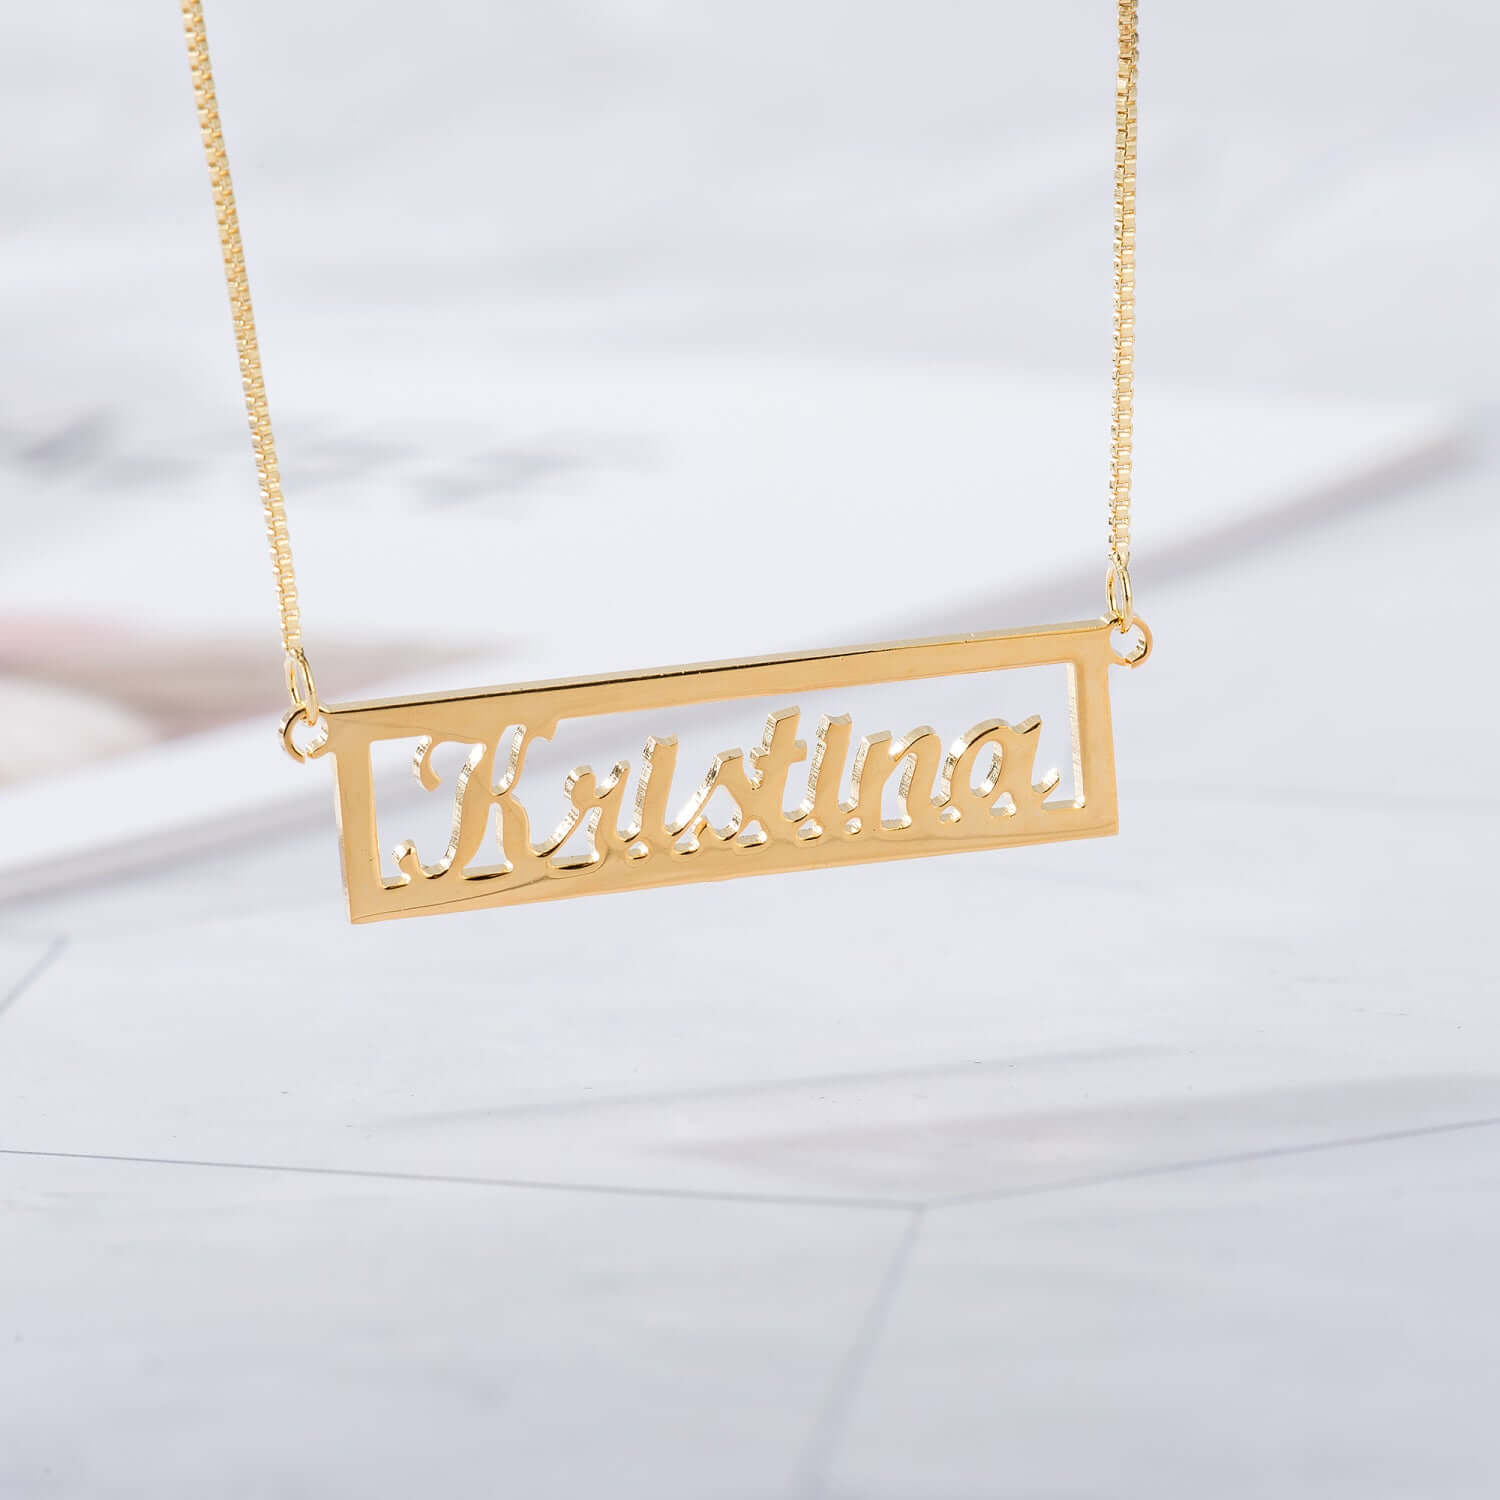 Dazzling Personalized Custom Framed Name Necklace